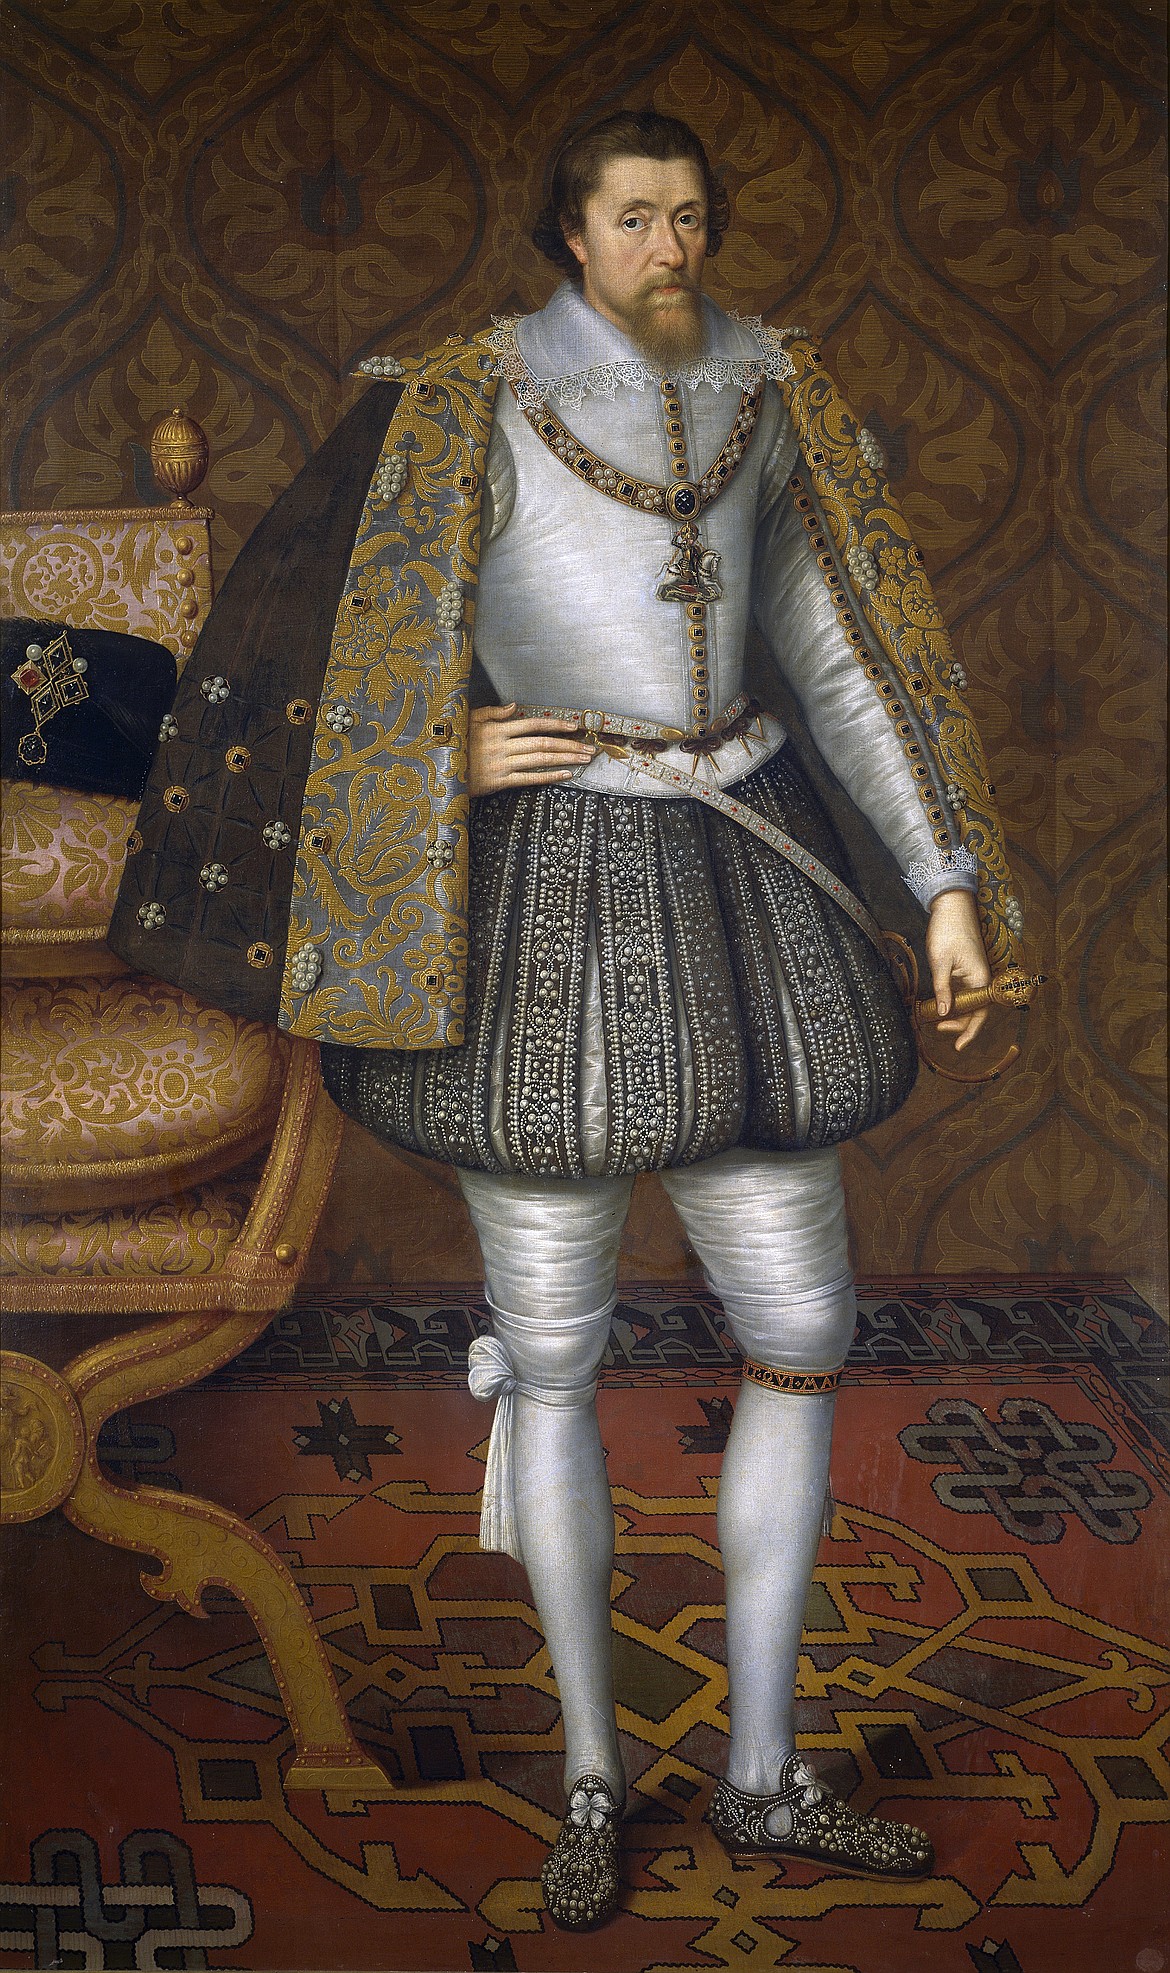 King James I of England (1566-1625) disappointed the Puritans by agreeing to only modest church reforms and was harsh with the Separatists (Pilgrims).